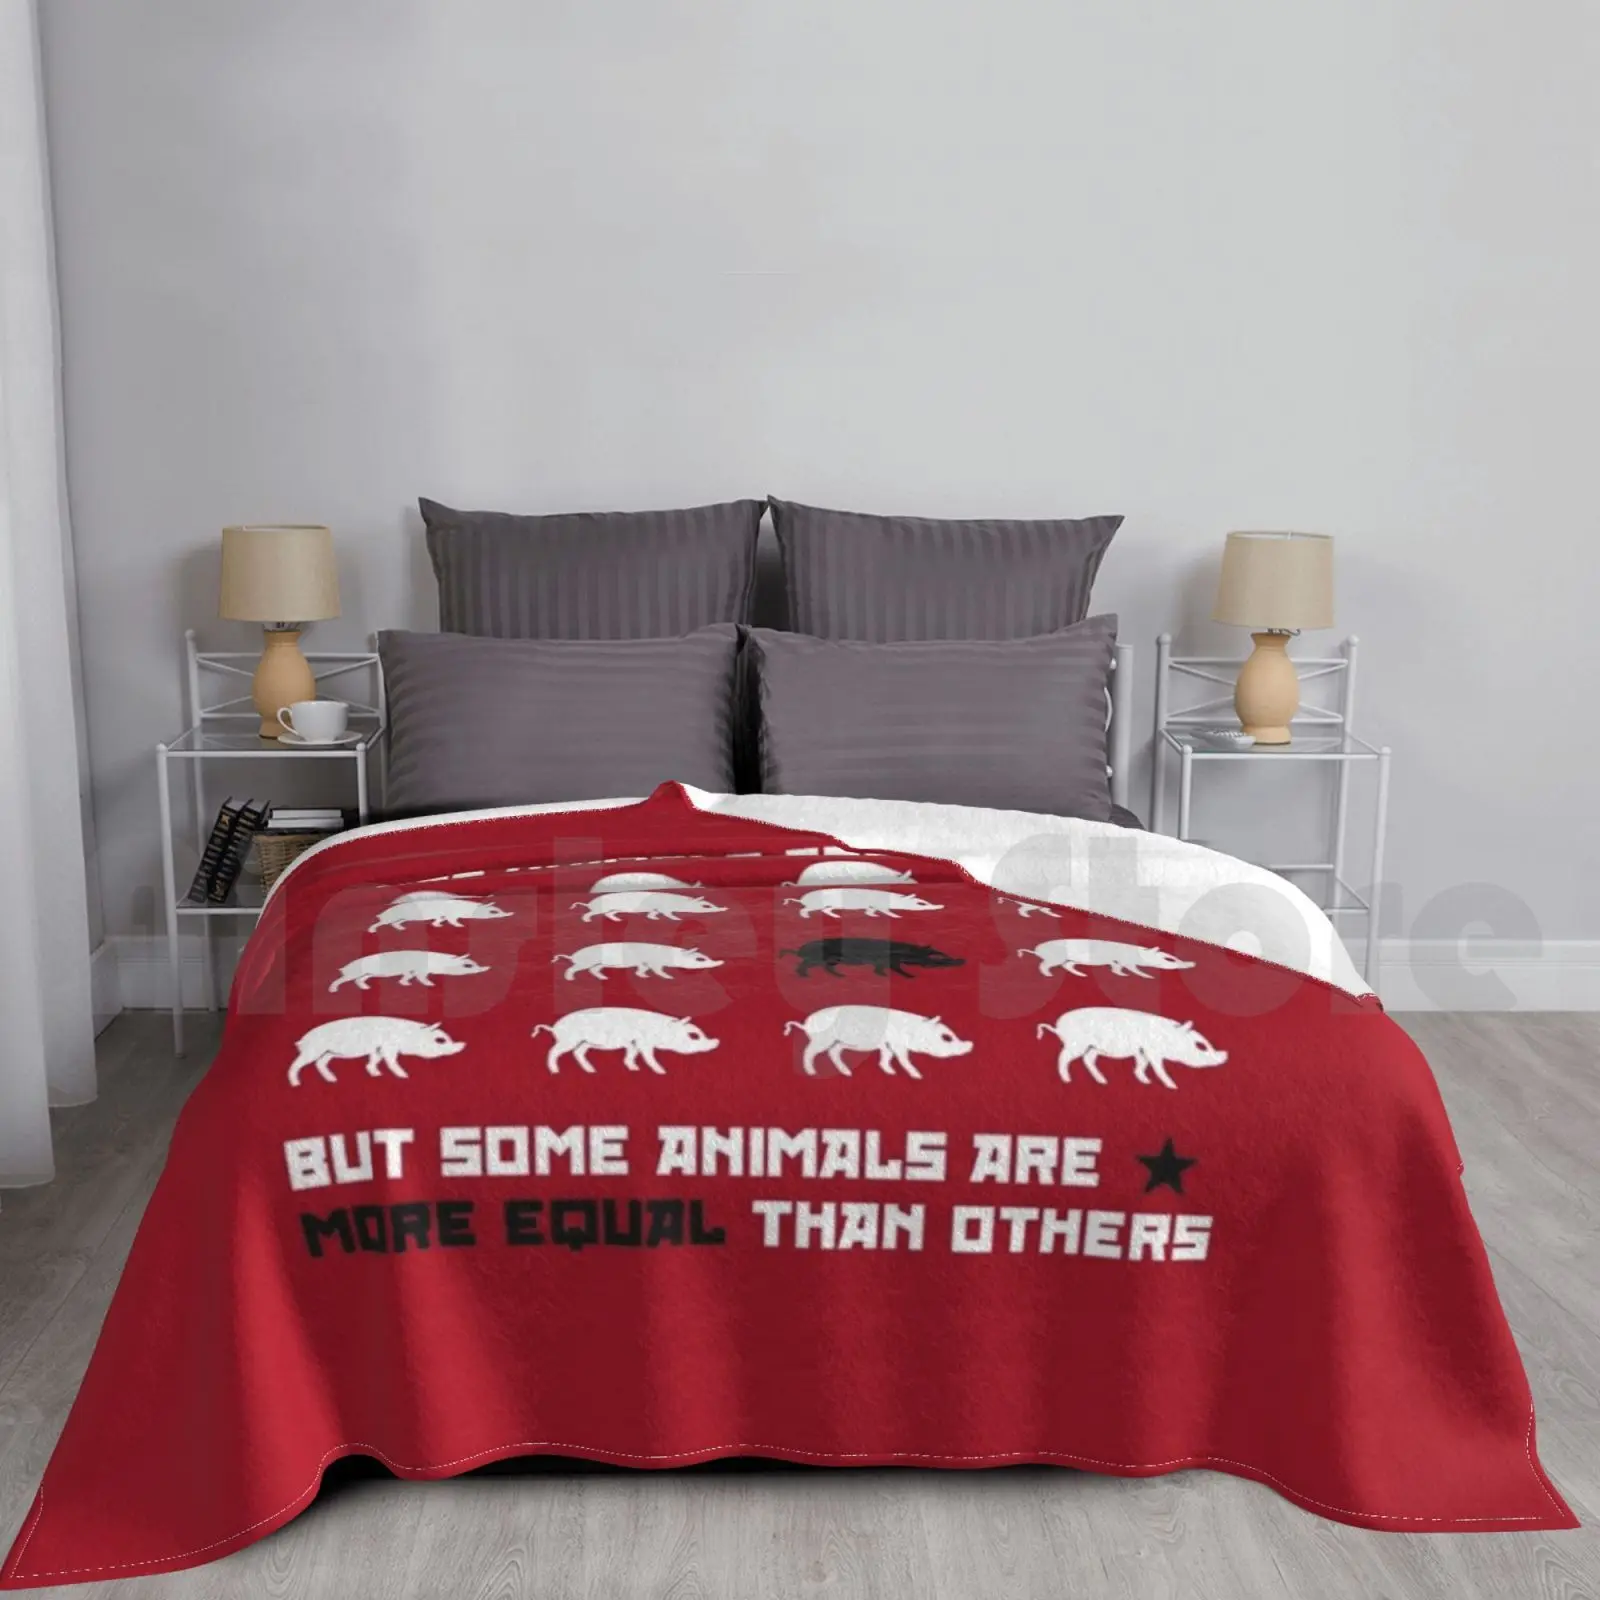 

All Animals Are Equal 2 ( Red ) Blanket For Sofa Bed Travel Animal Farm George Orwell Russian Revolution